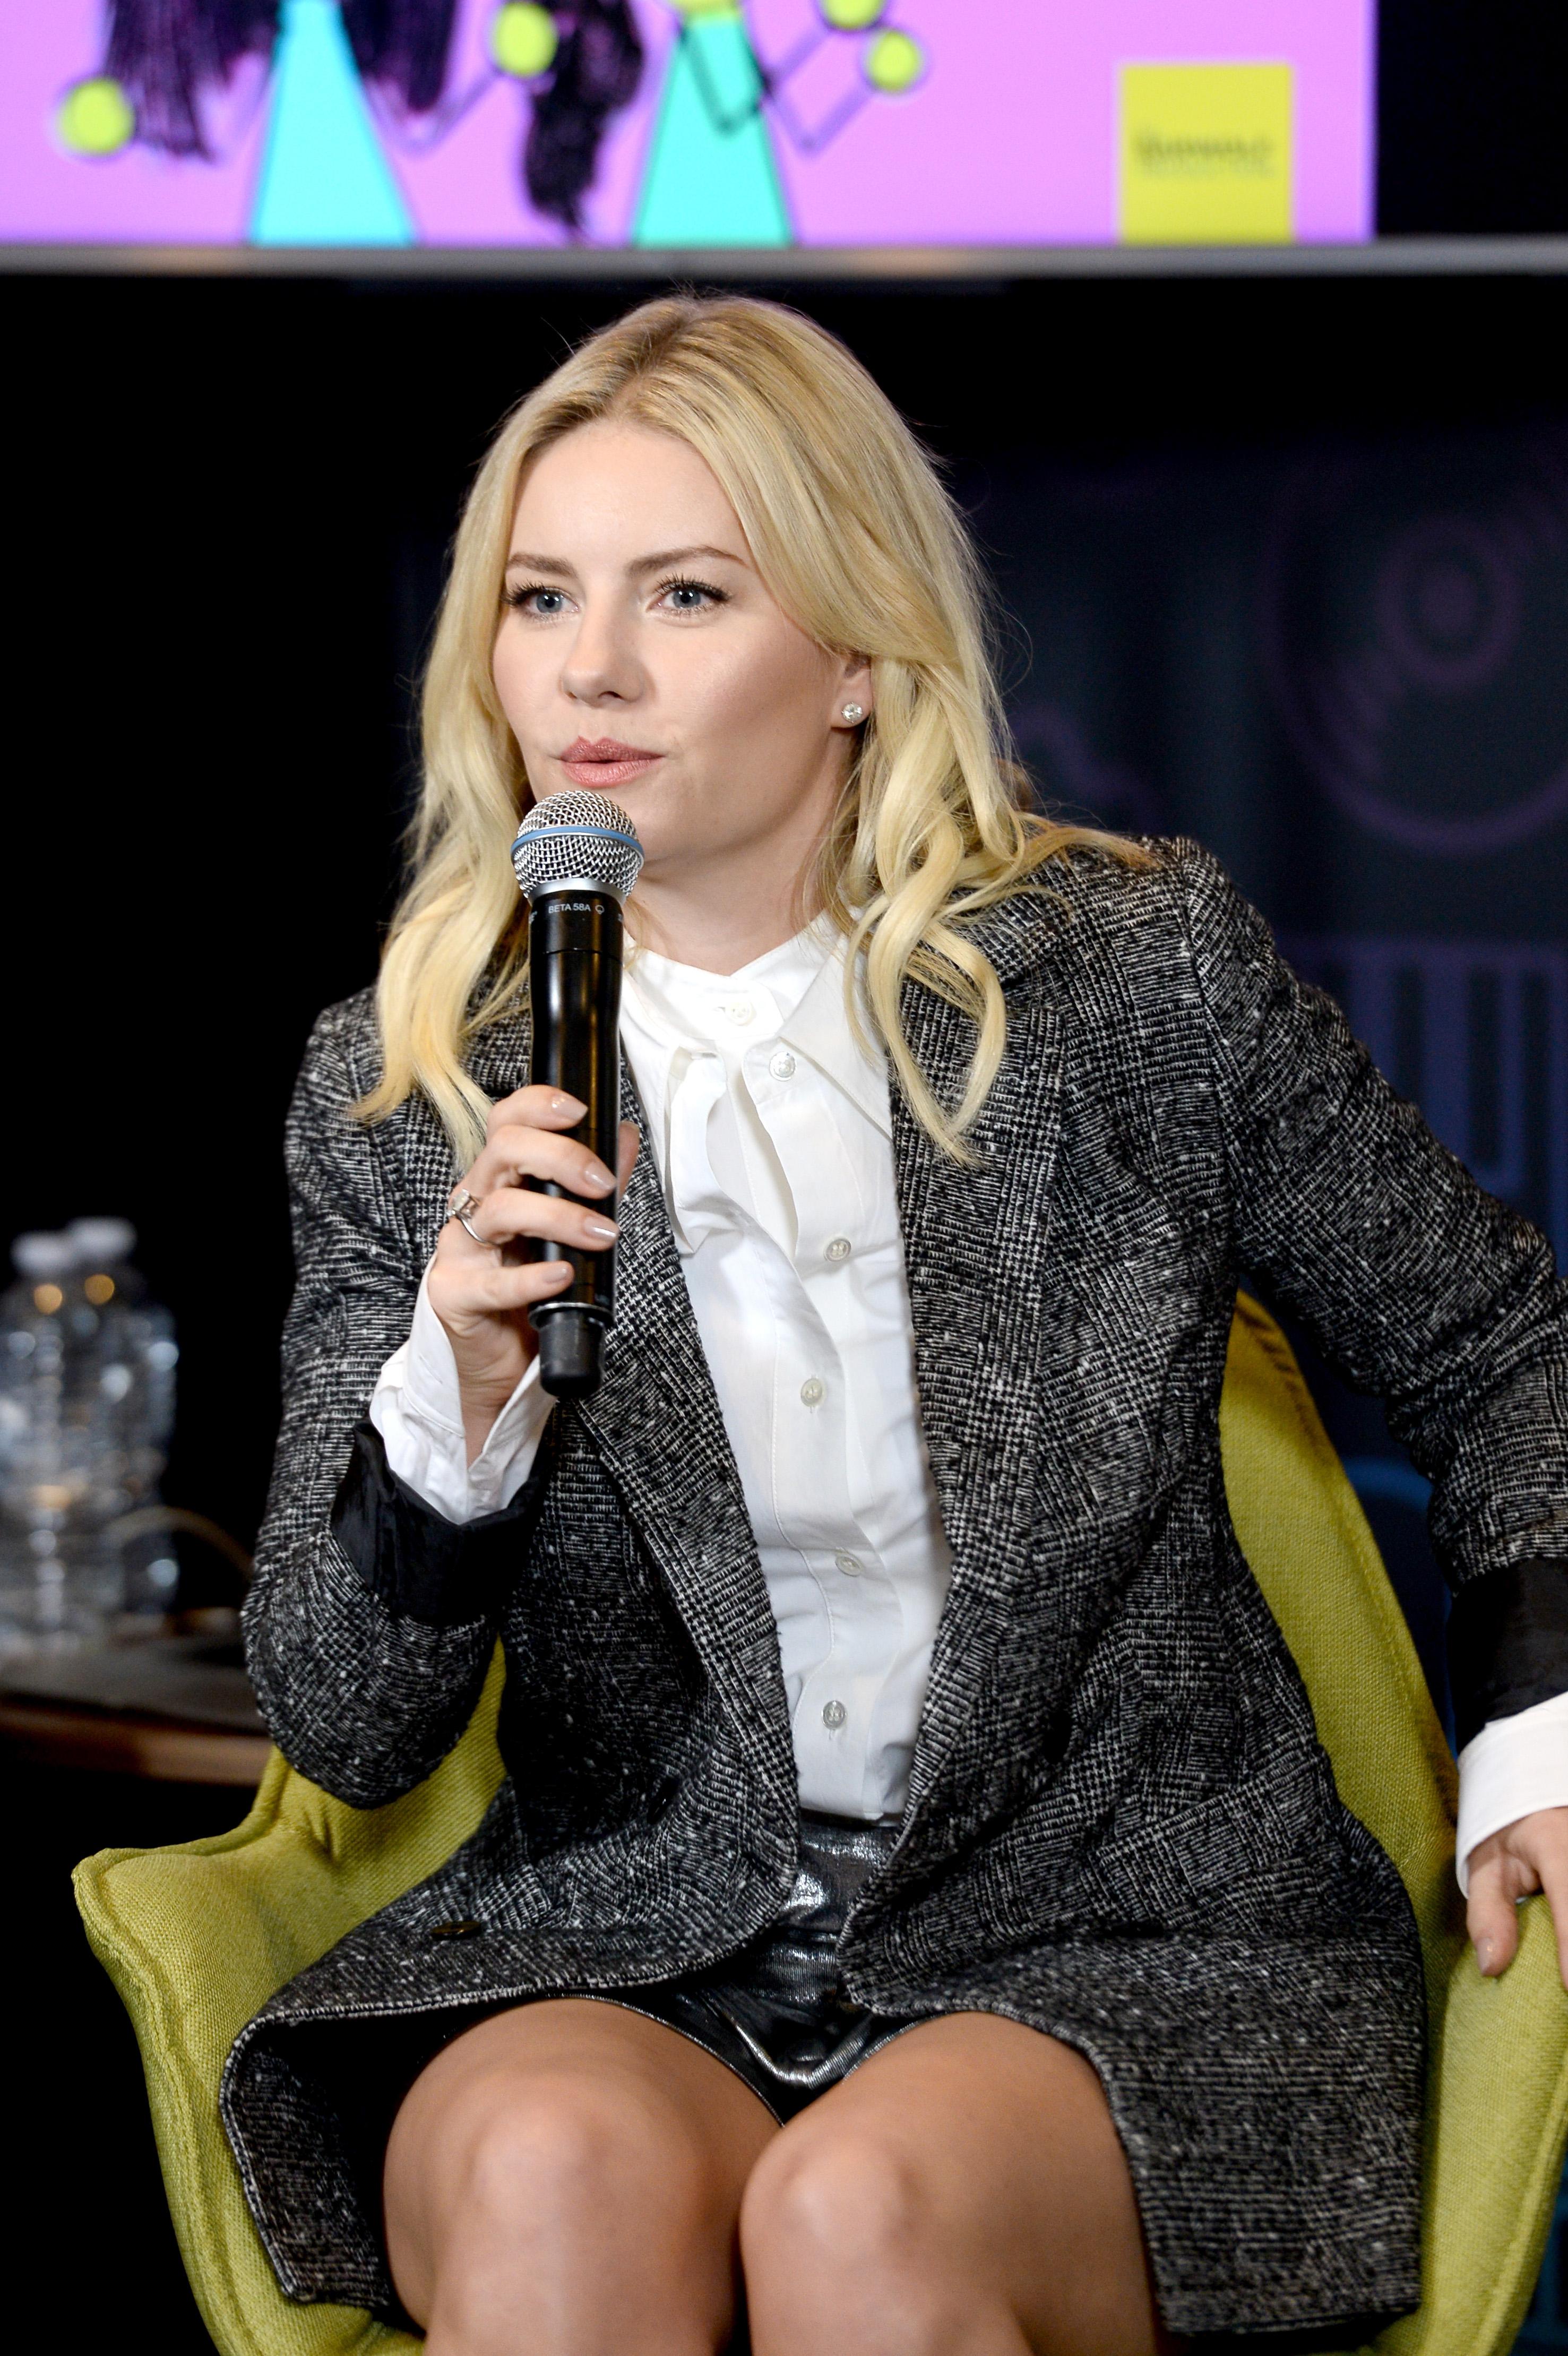 Elisha Cuthbert Has More in Store After ‘The Ranch’ Ends